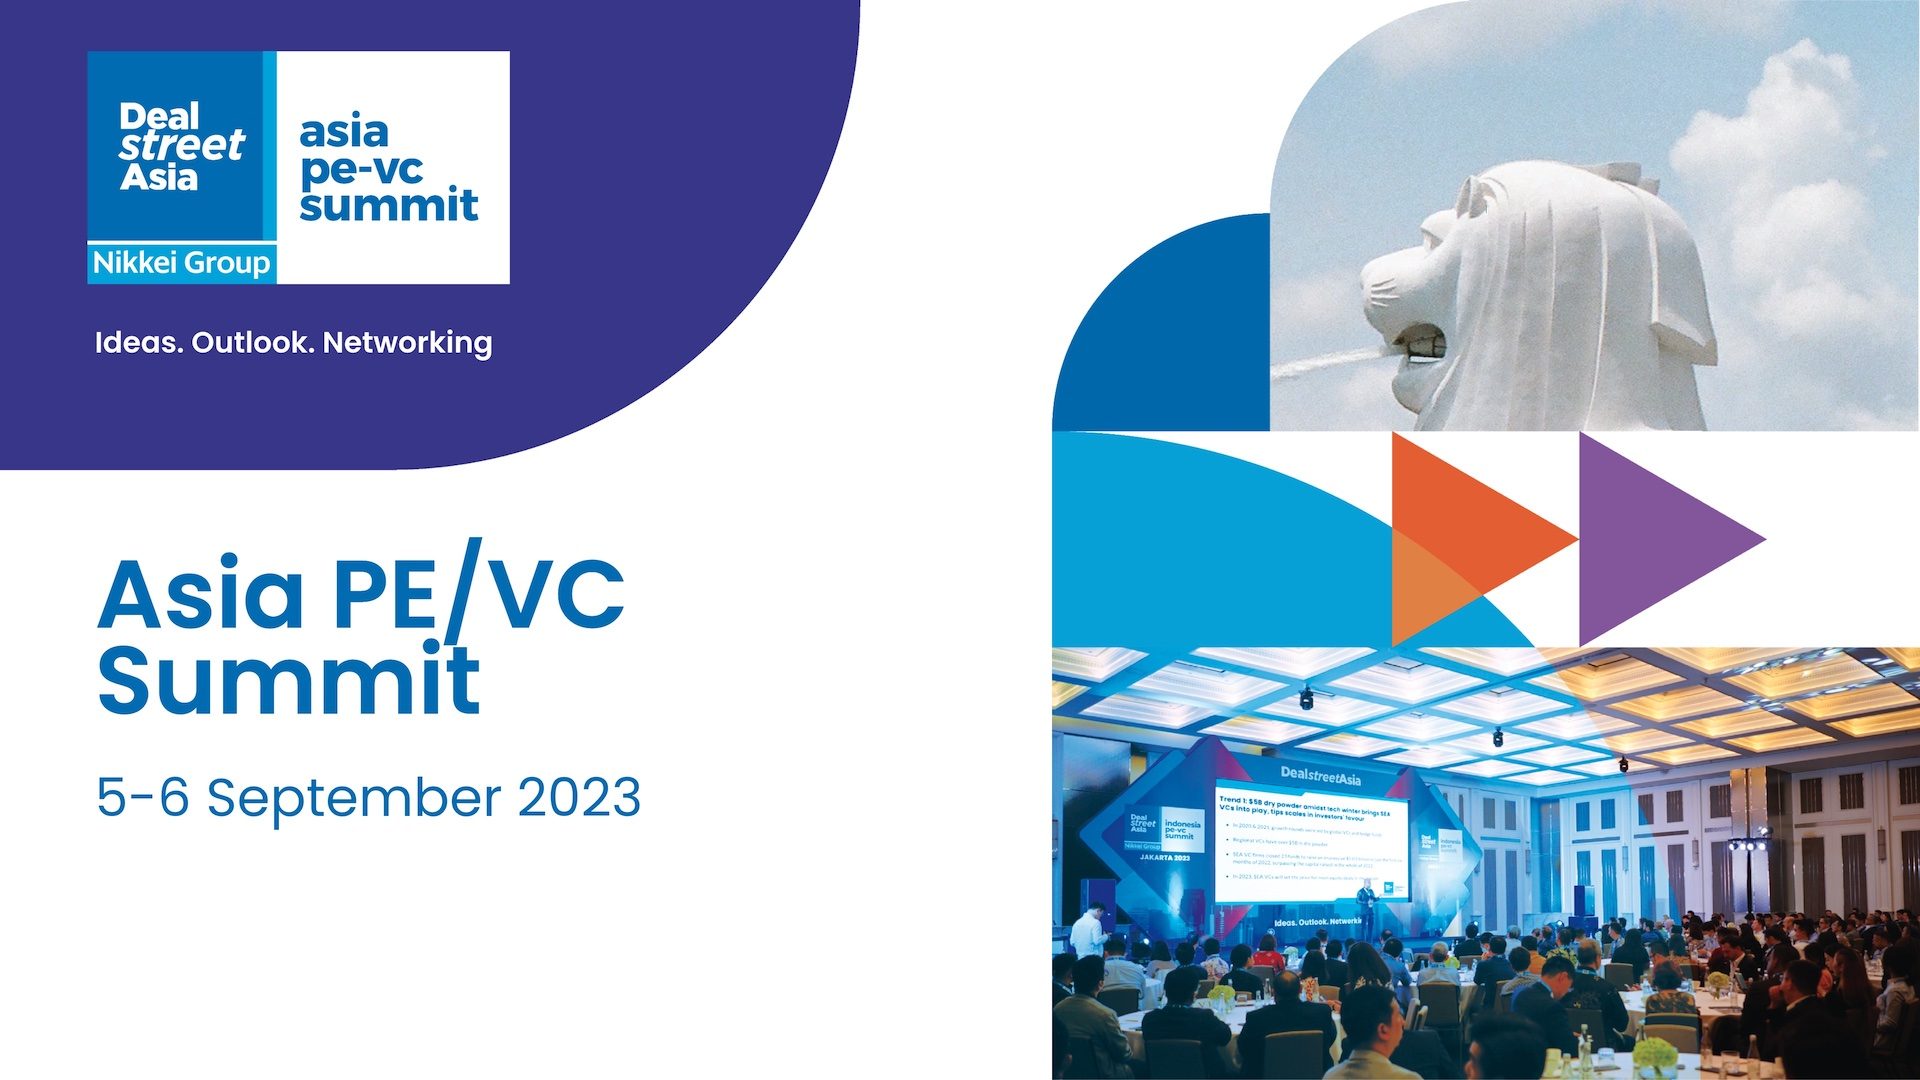 Asia PE-VC Summit 2023 goes live. 16 sessions featuring 51 speakers on Day 1